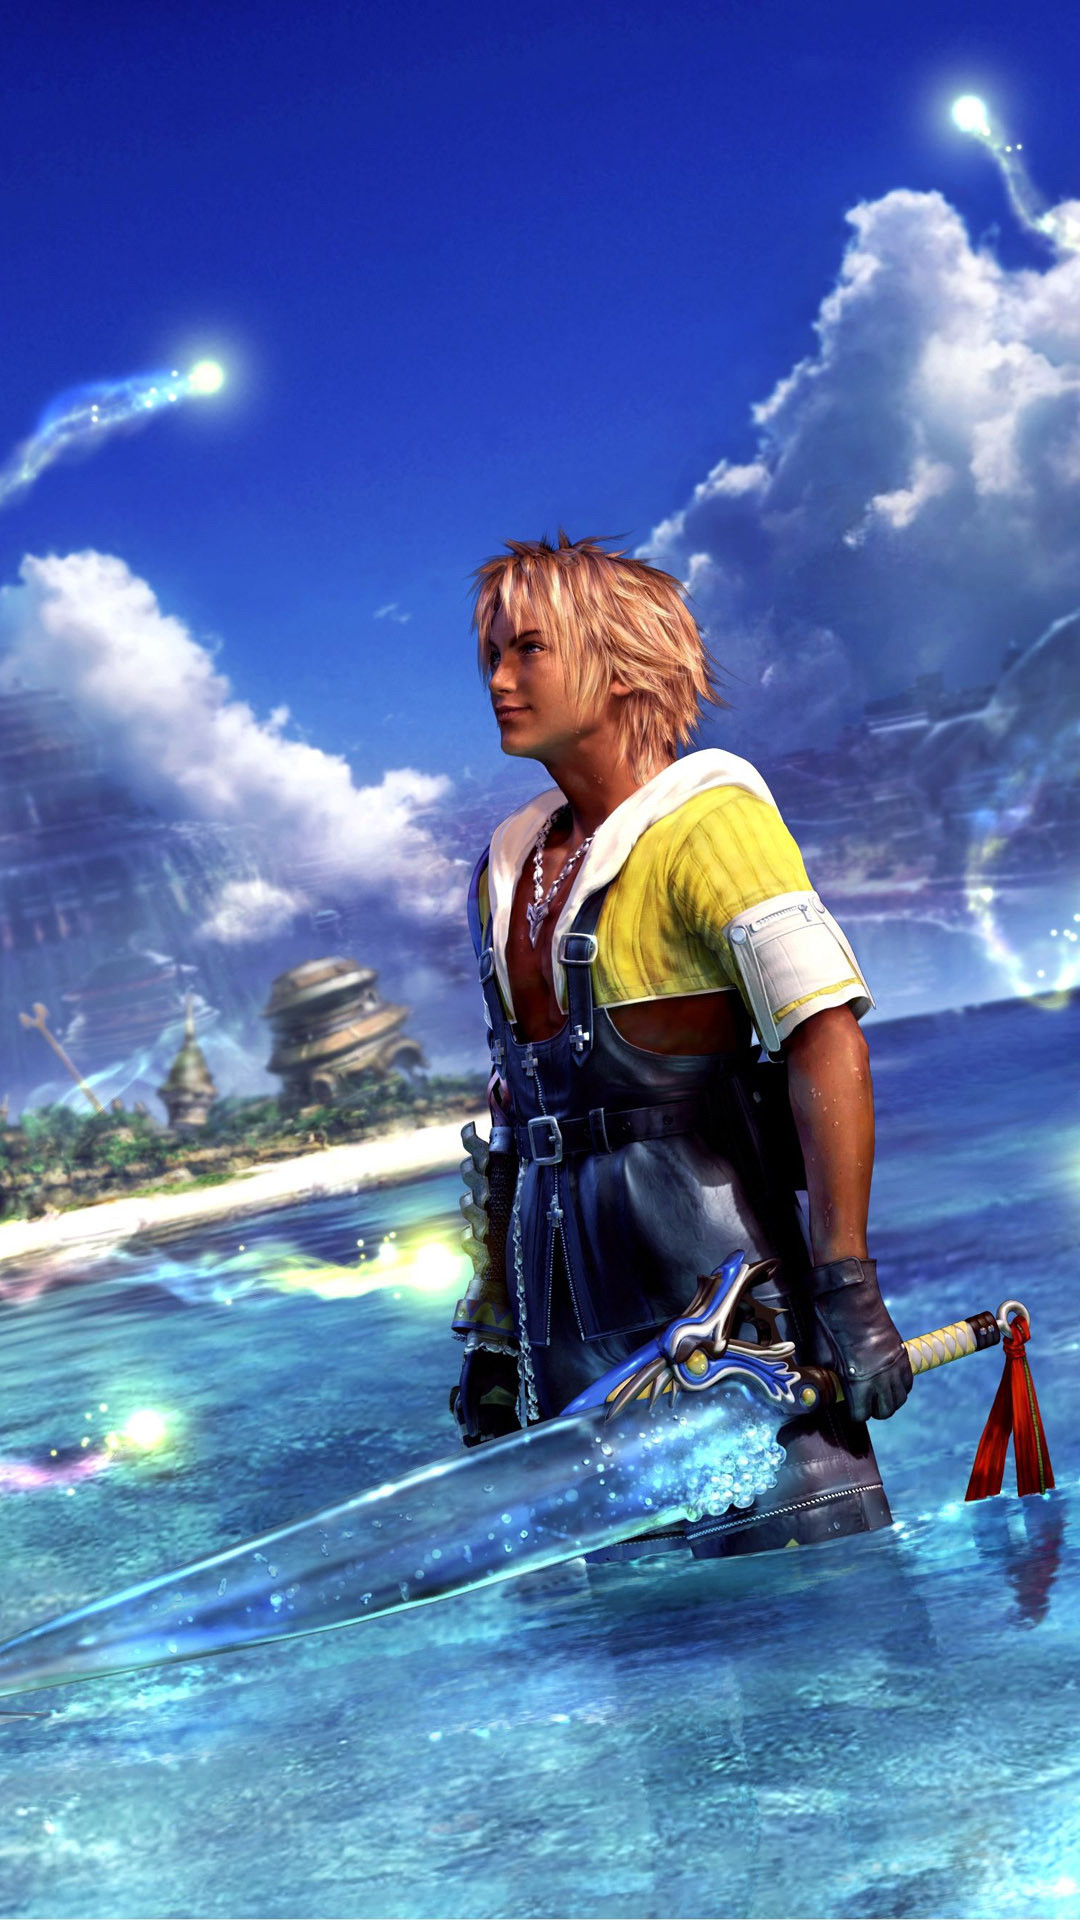 final fantasy phone wallpaper,product,water,recreation,vehicle,world